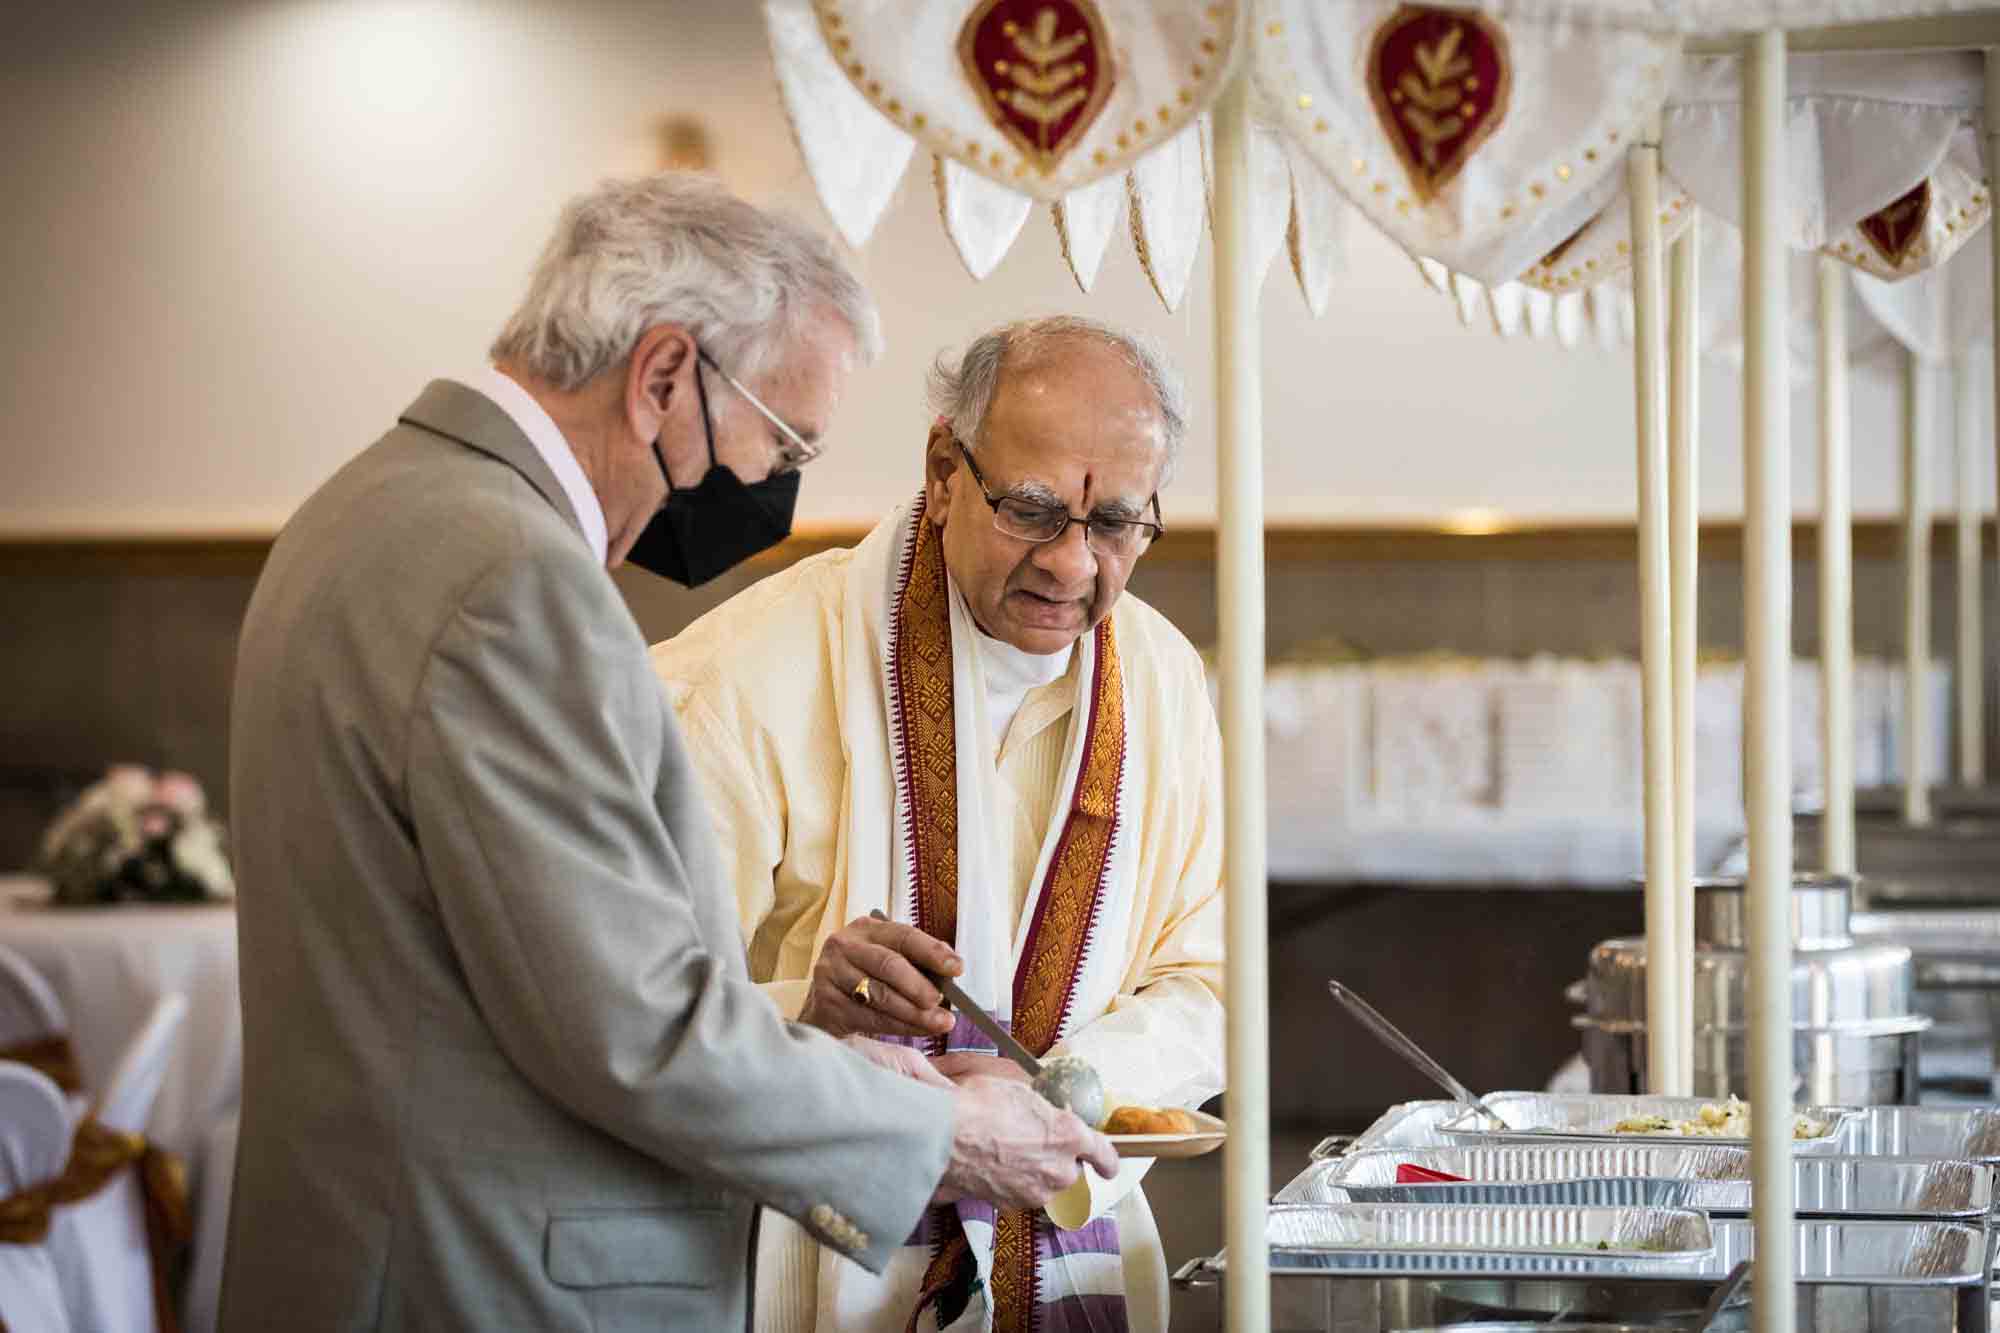 Hindu Temple Society of North America wedding photos of an older man serving another older man food